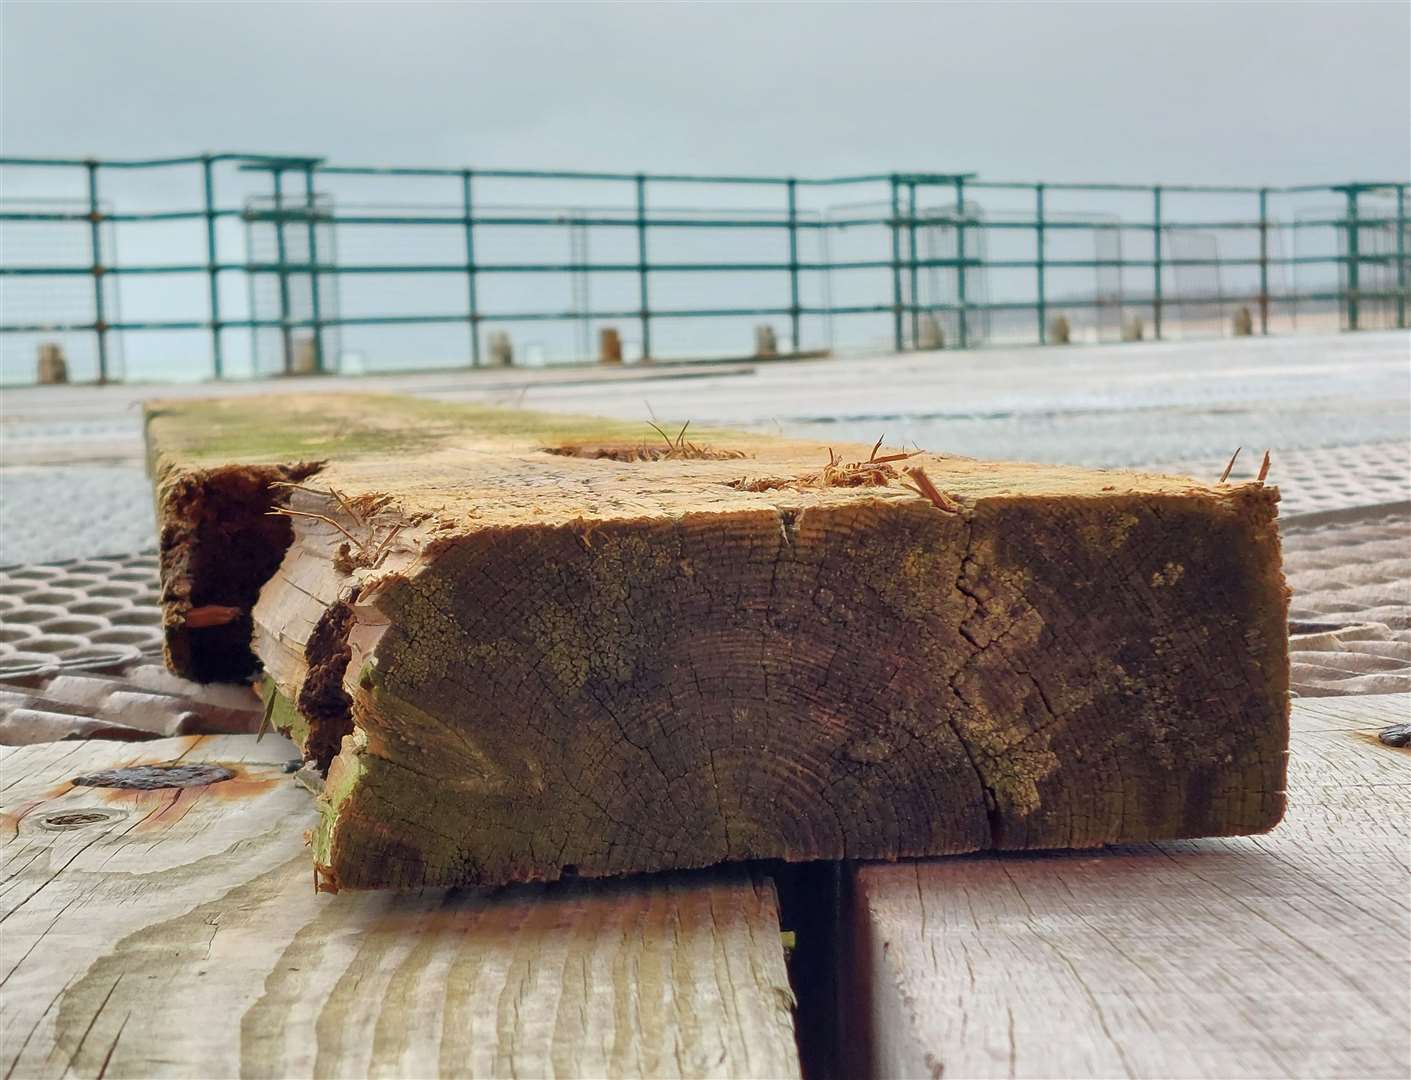 The pier was damaged during Storm Ciarán in November